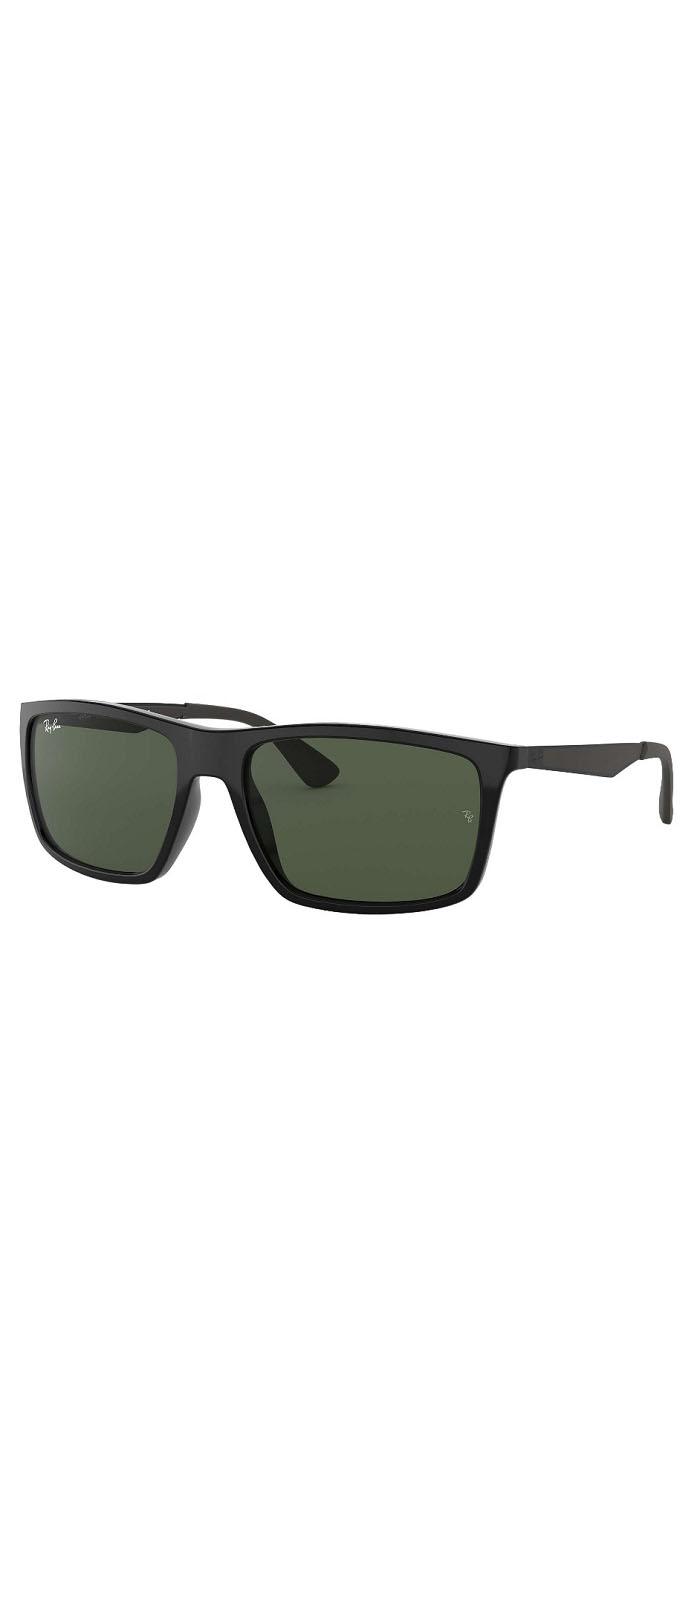 Ray-Ban Sunglasses - RB4228-601/71-58 - LifeStyle Collection